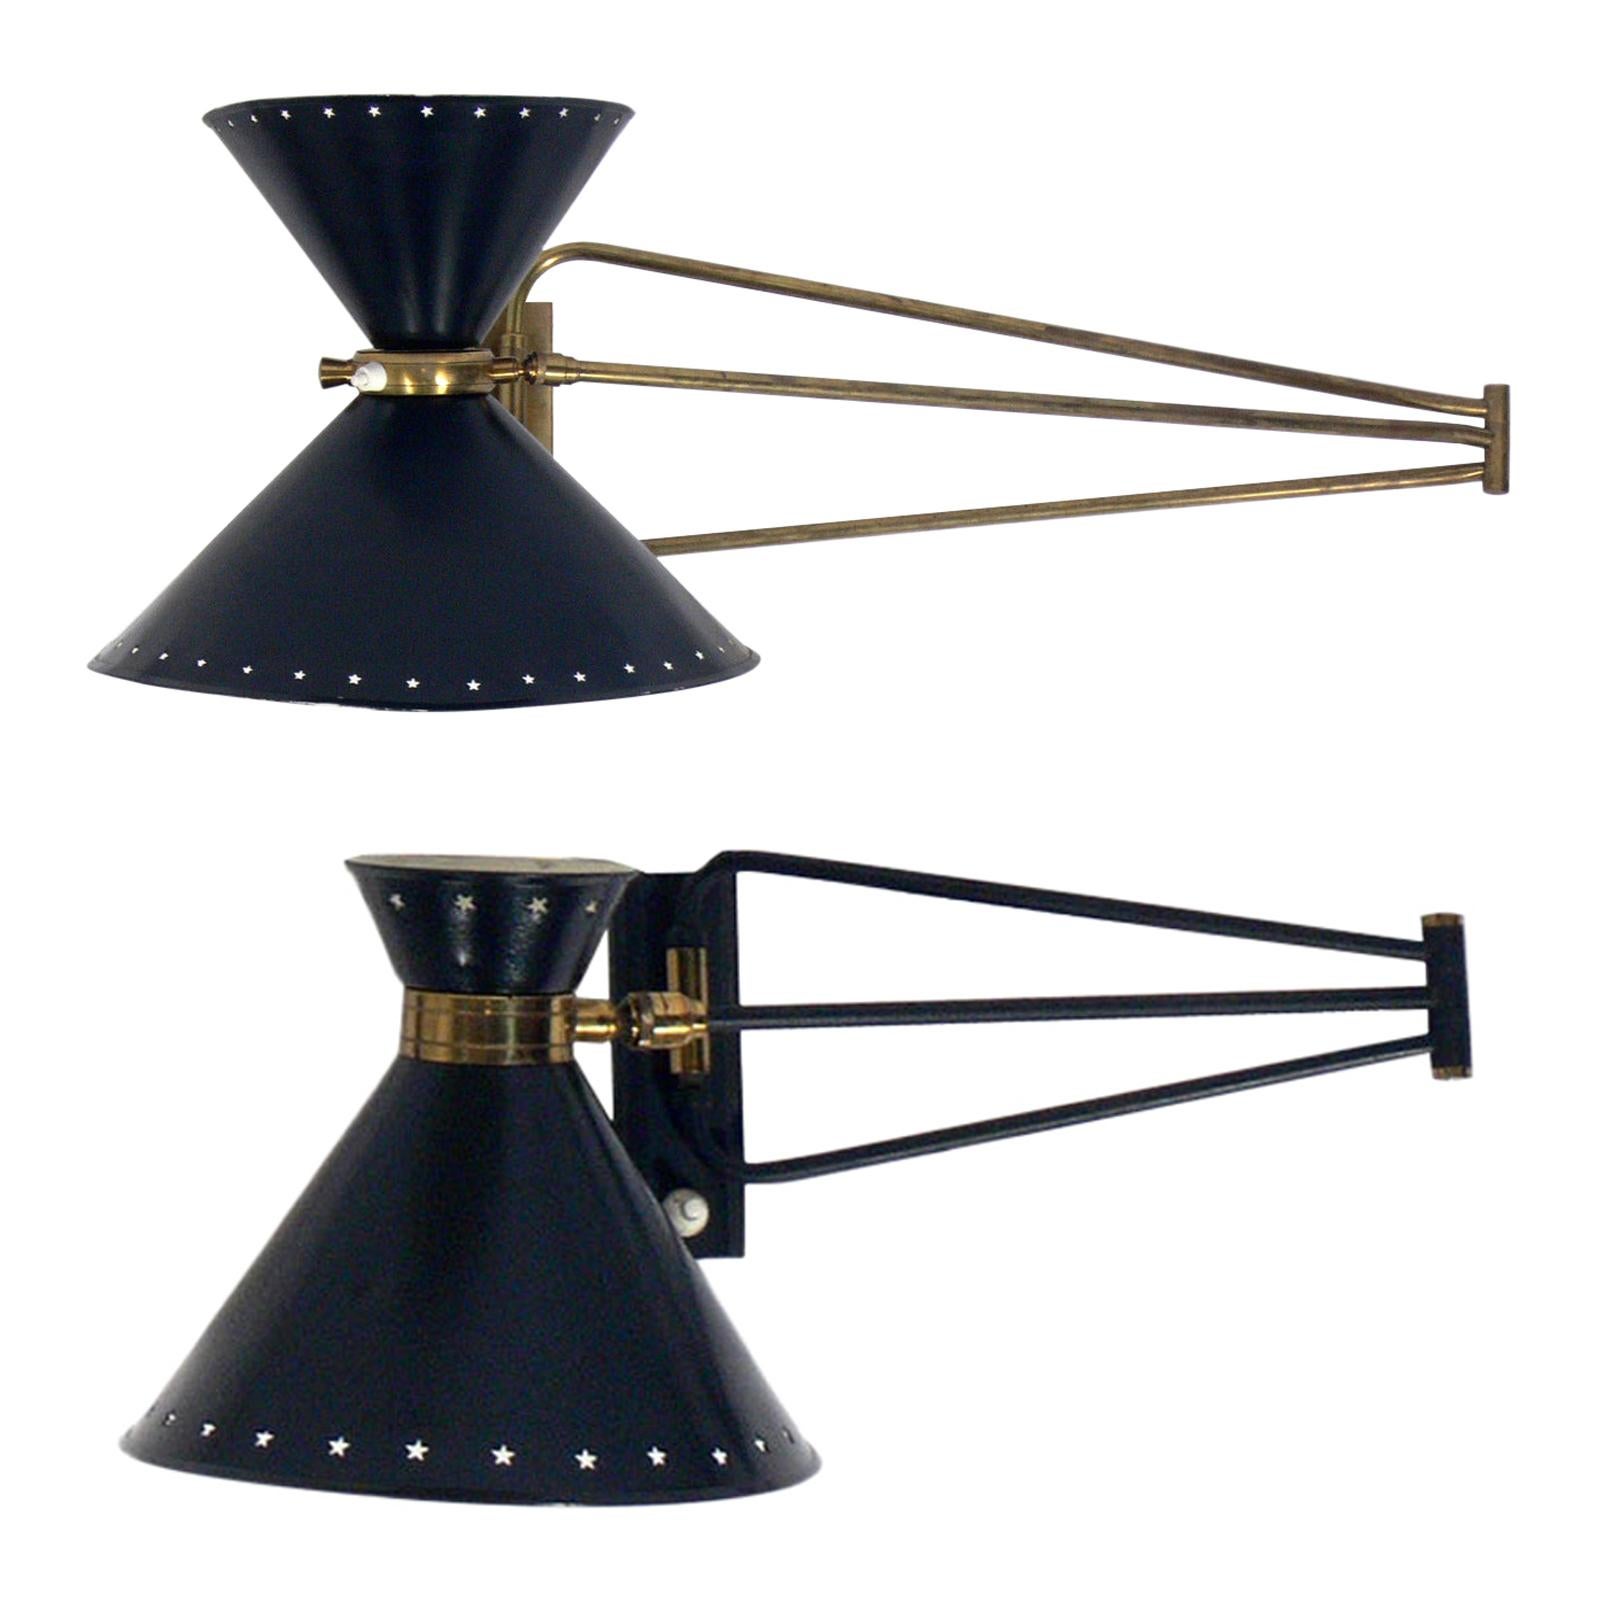 Selection of Articulating Wall Sconces by Rene Mathieu for Maison Lunel